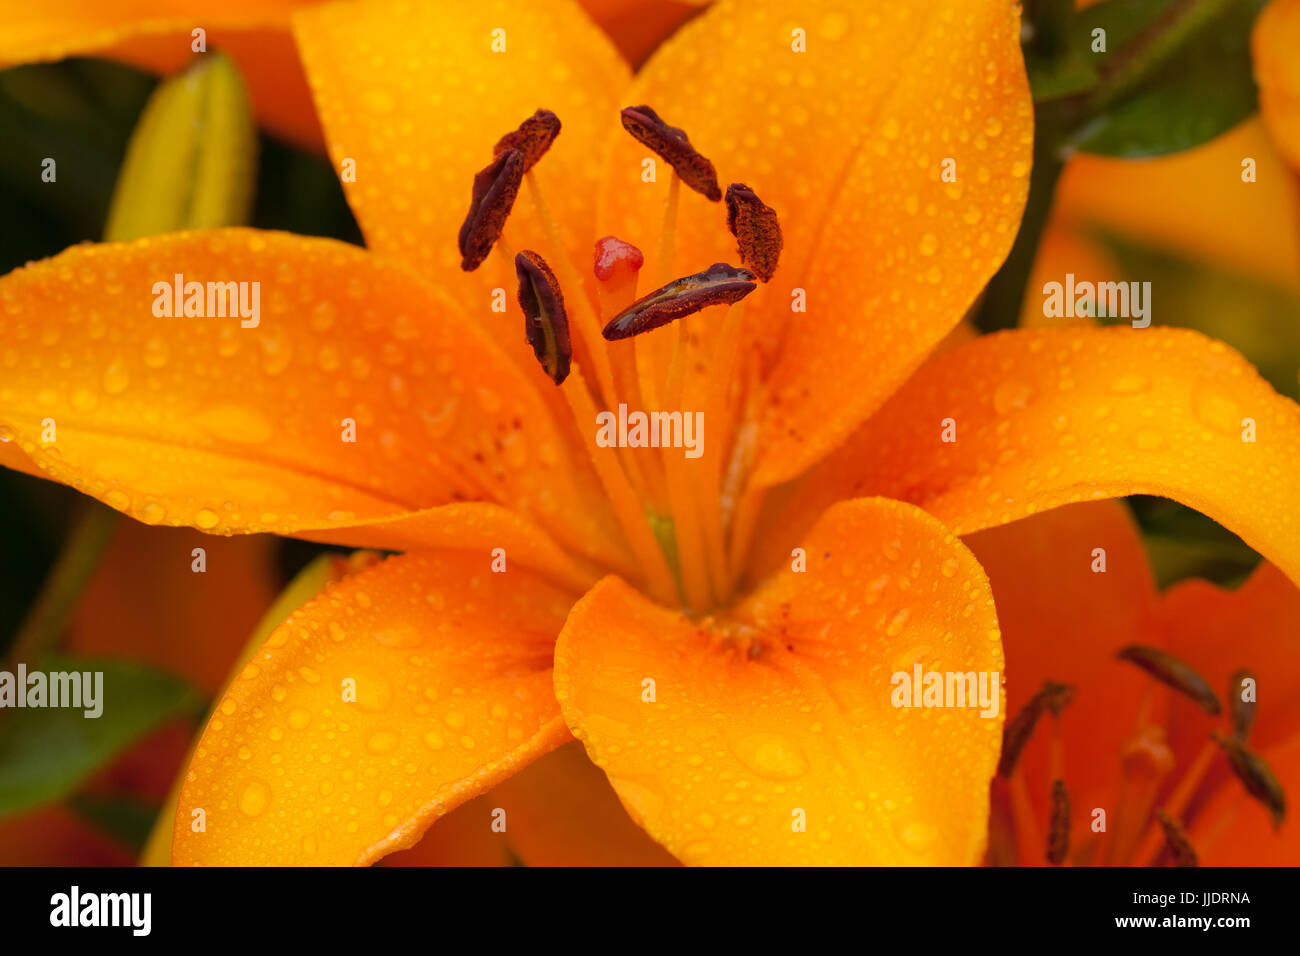 Lily (Lilium) Advantage. Close Up Of Yellow Orange Flower Of Lily Advantage With Drops Water. Stock Photo